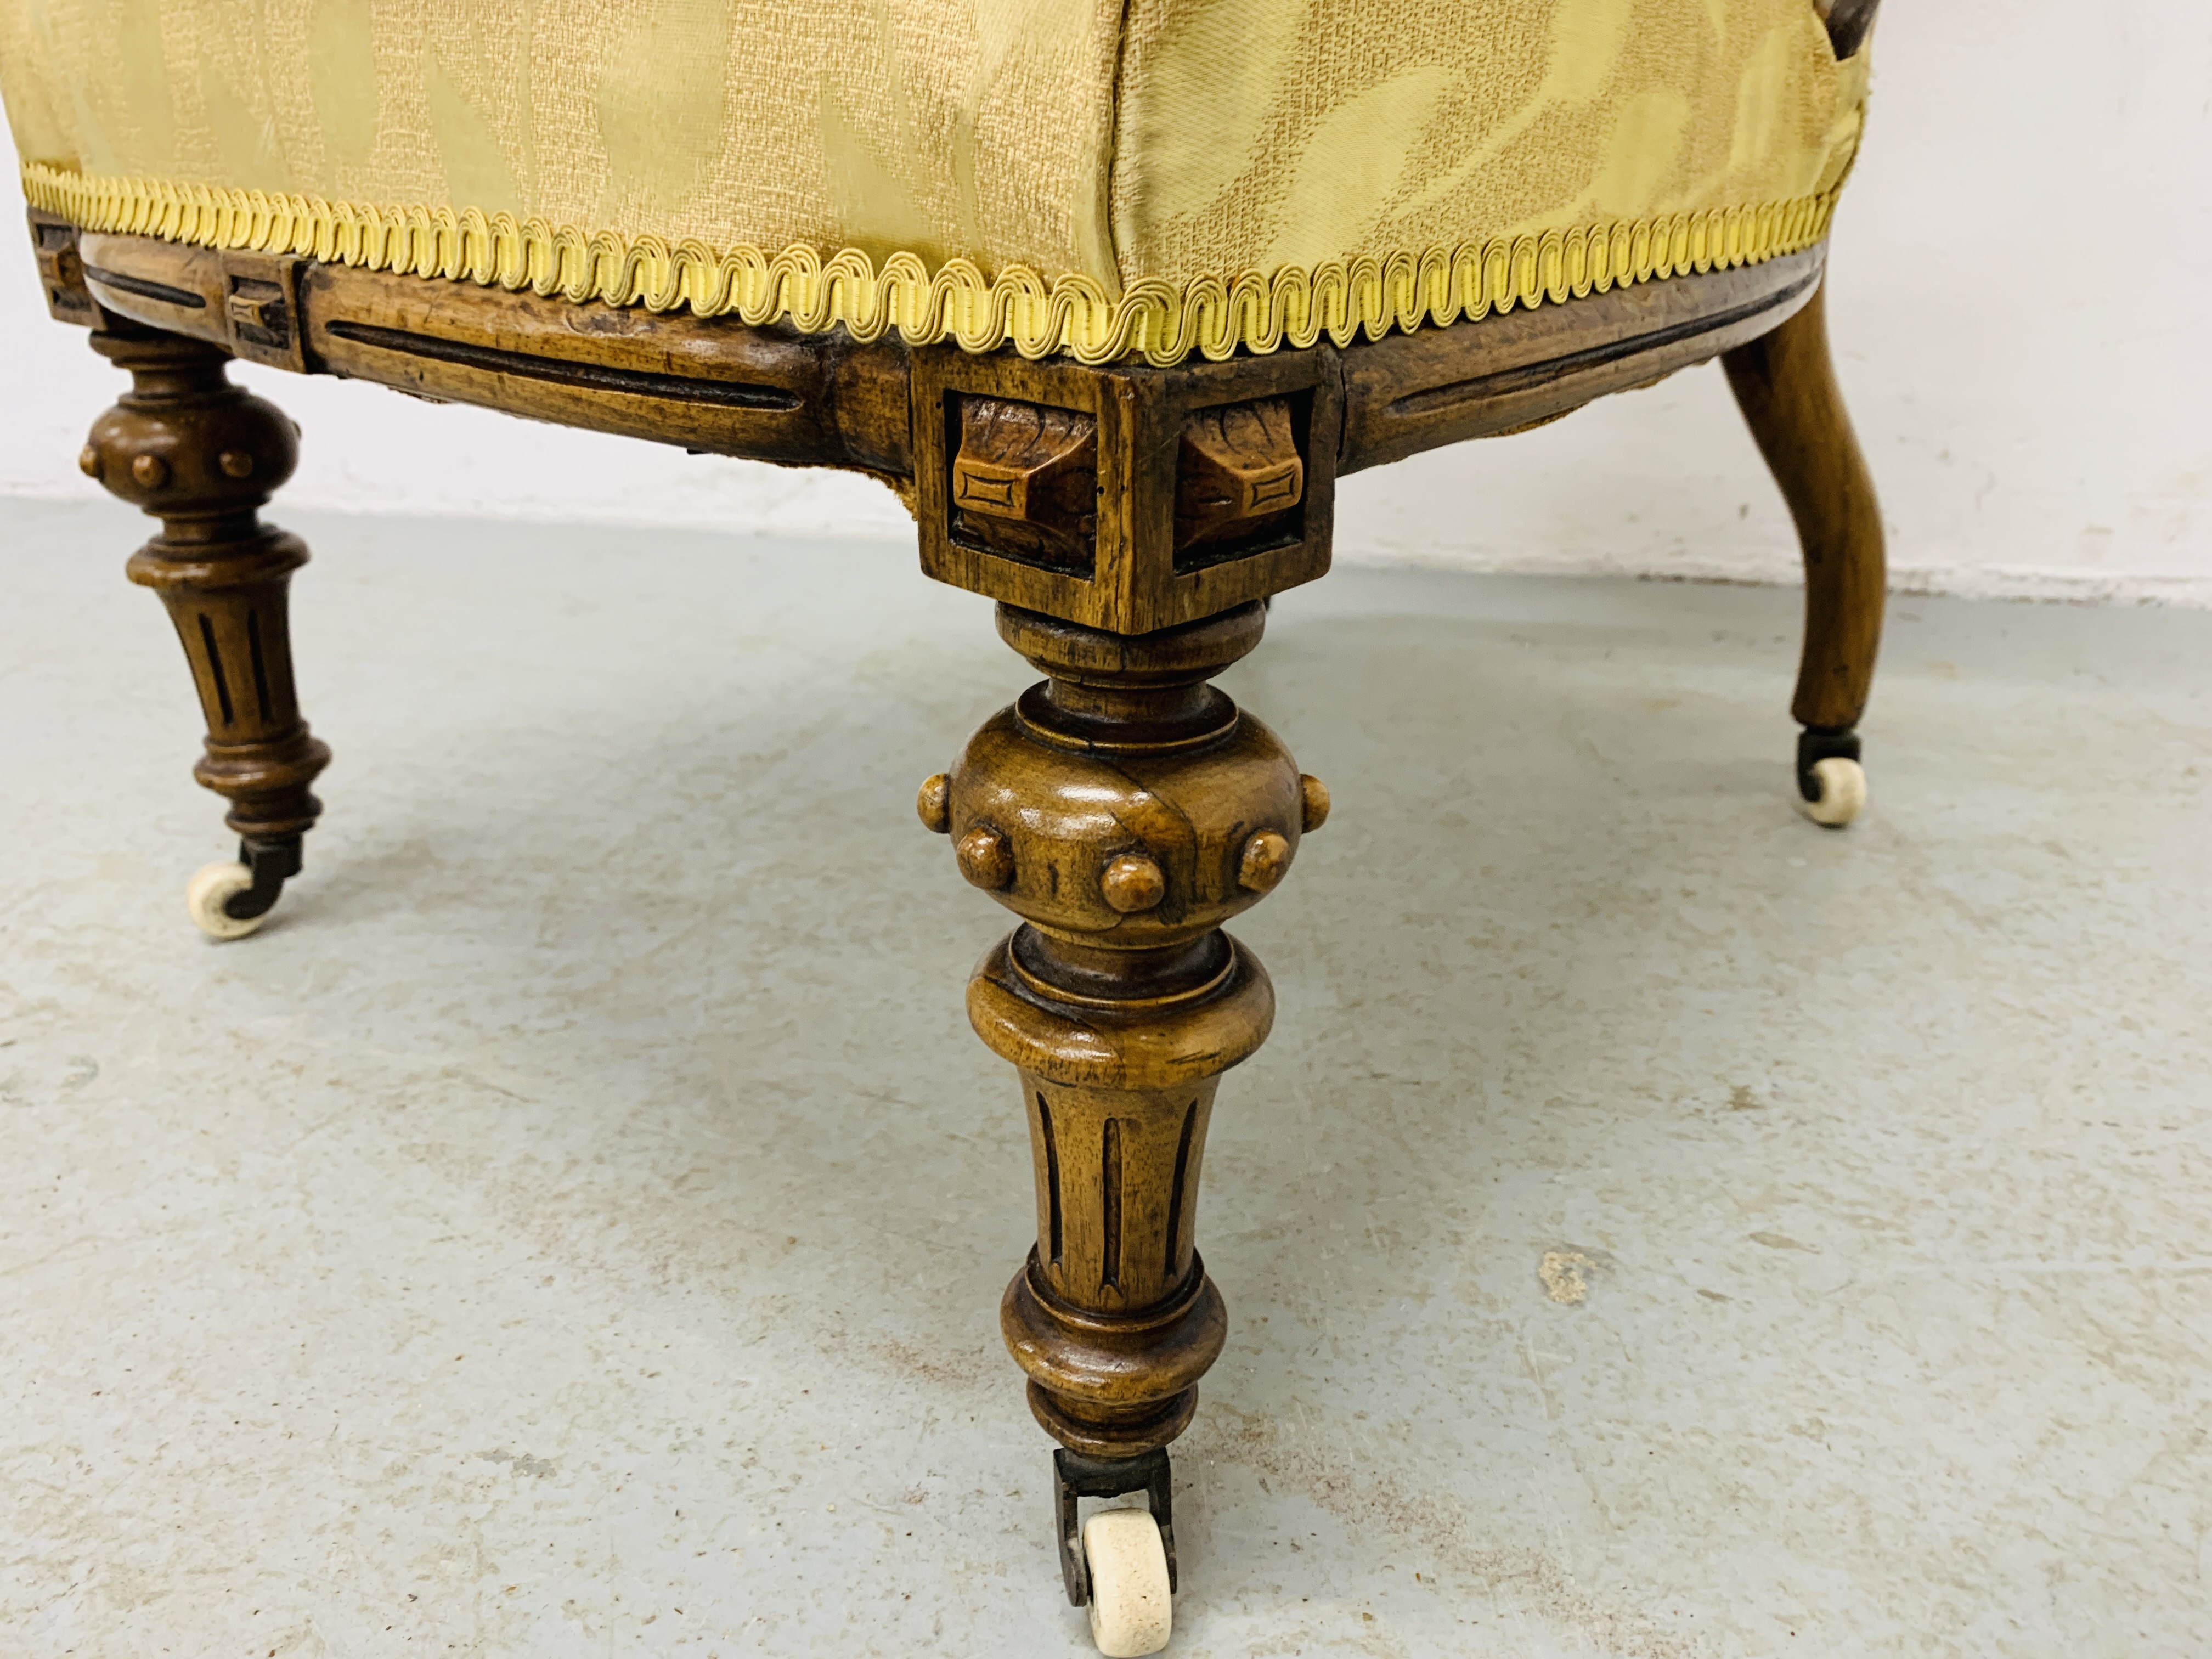 VICTORIAN ORNATE WALNUT NURSING CHAIR, WITH GOLD UPHOLSTERED SEAT AND BACK - H 85CM. - Image 7 of 9